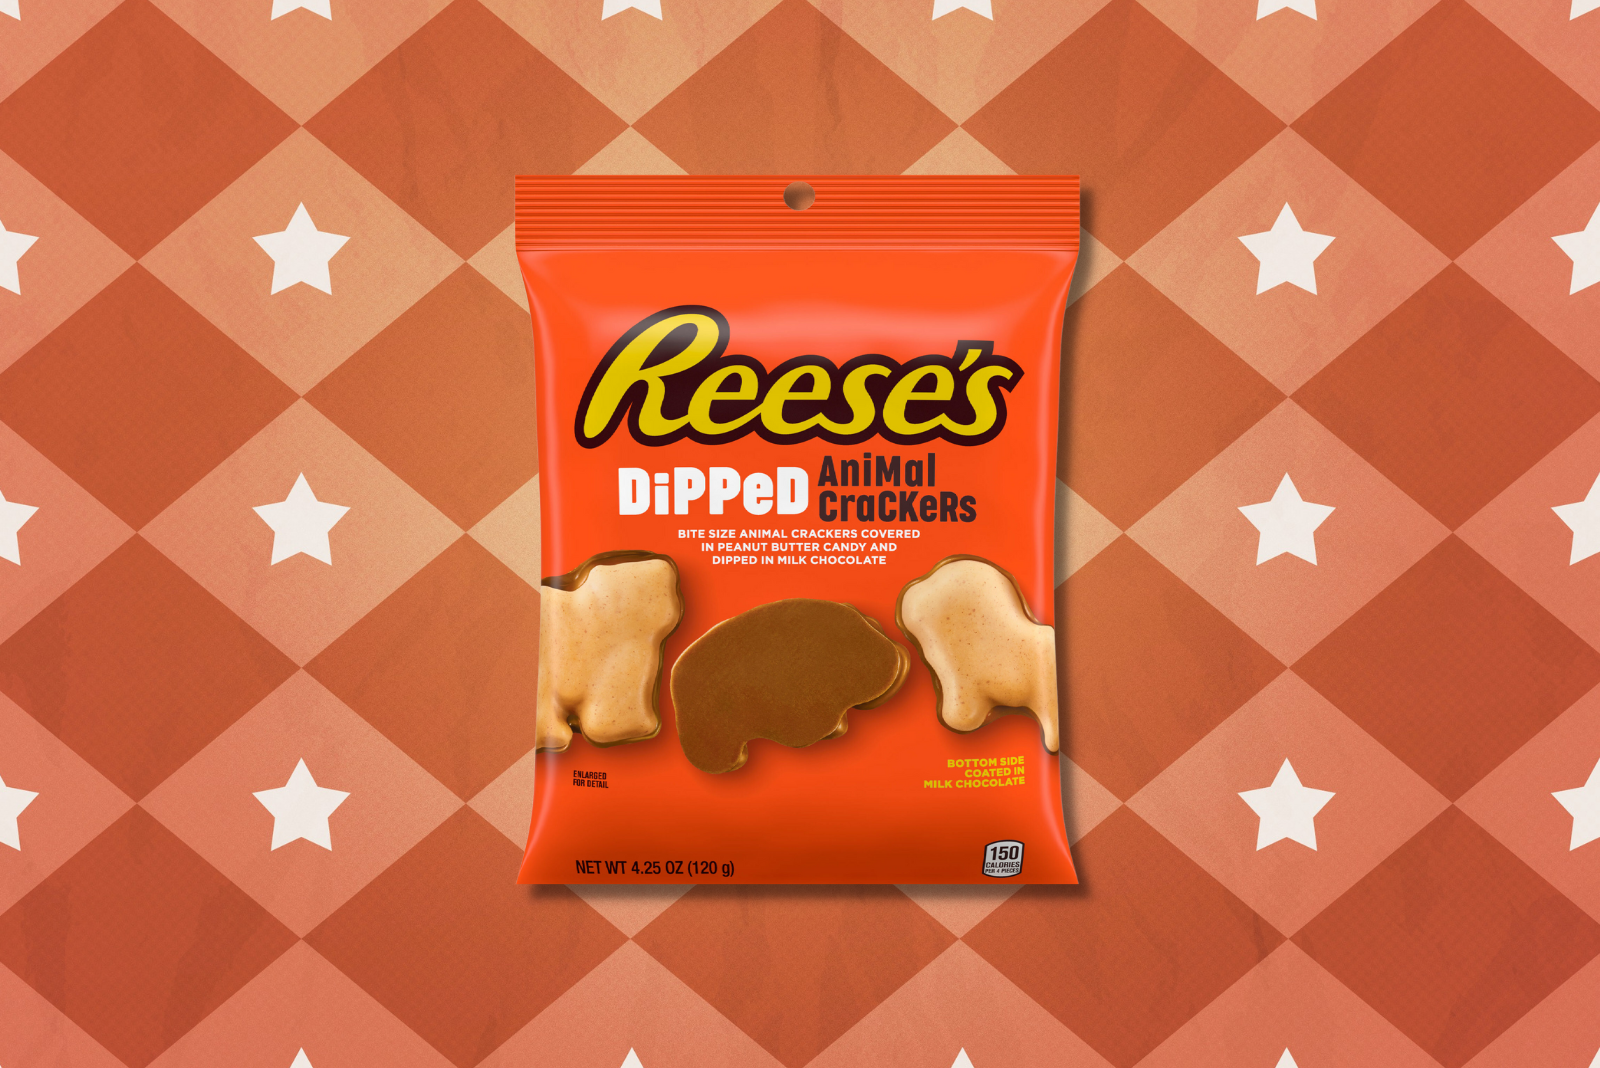 Reese's stirs nostalgia with new Dipped Animal Crackers - Commercial Baking